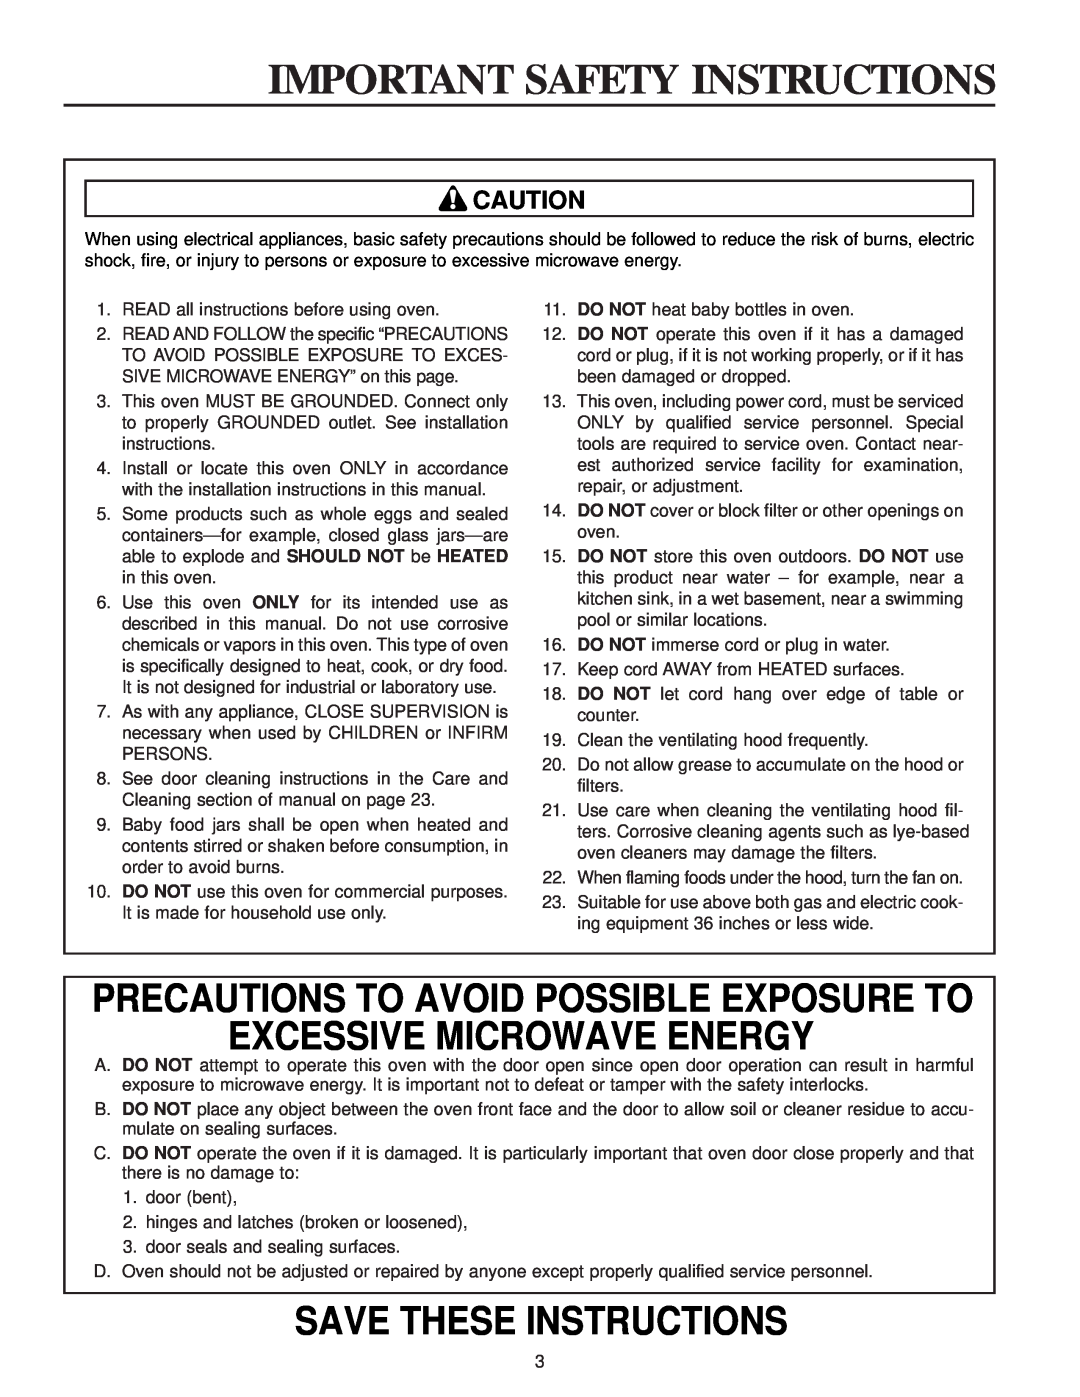 Maytag MMV4184AA Important Safety Instructions, Precautions To Avoid Possible Exposure To, Excessive Microwave Energy 